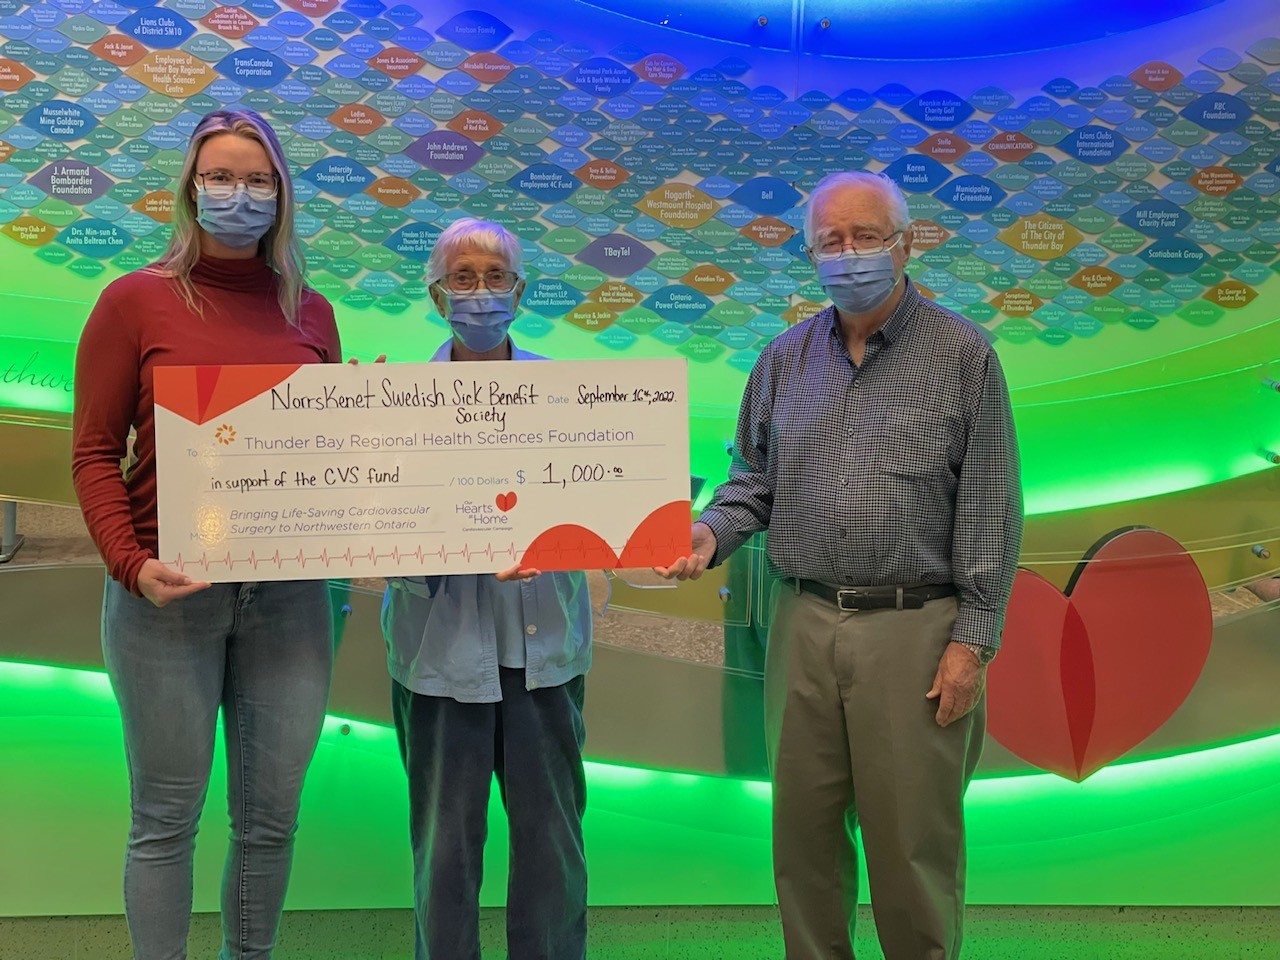 Norrskenet Society Supporting Cardiac Care